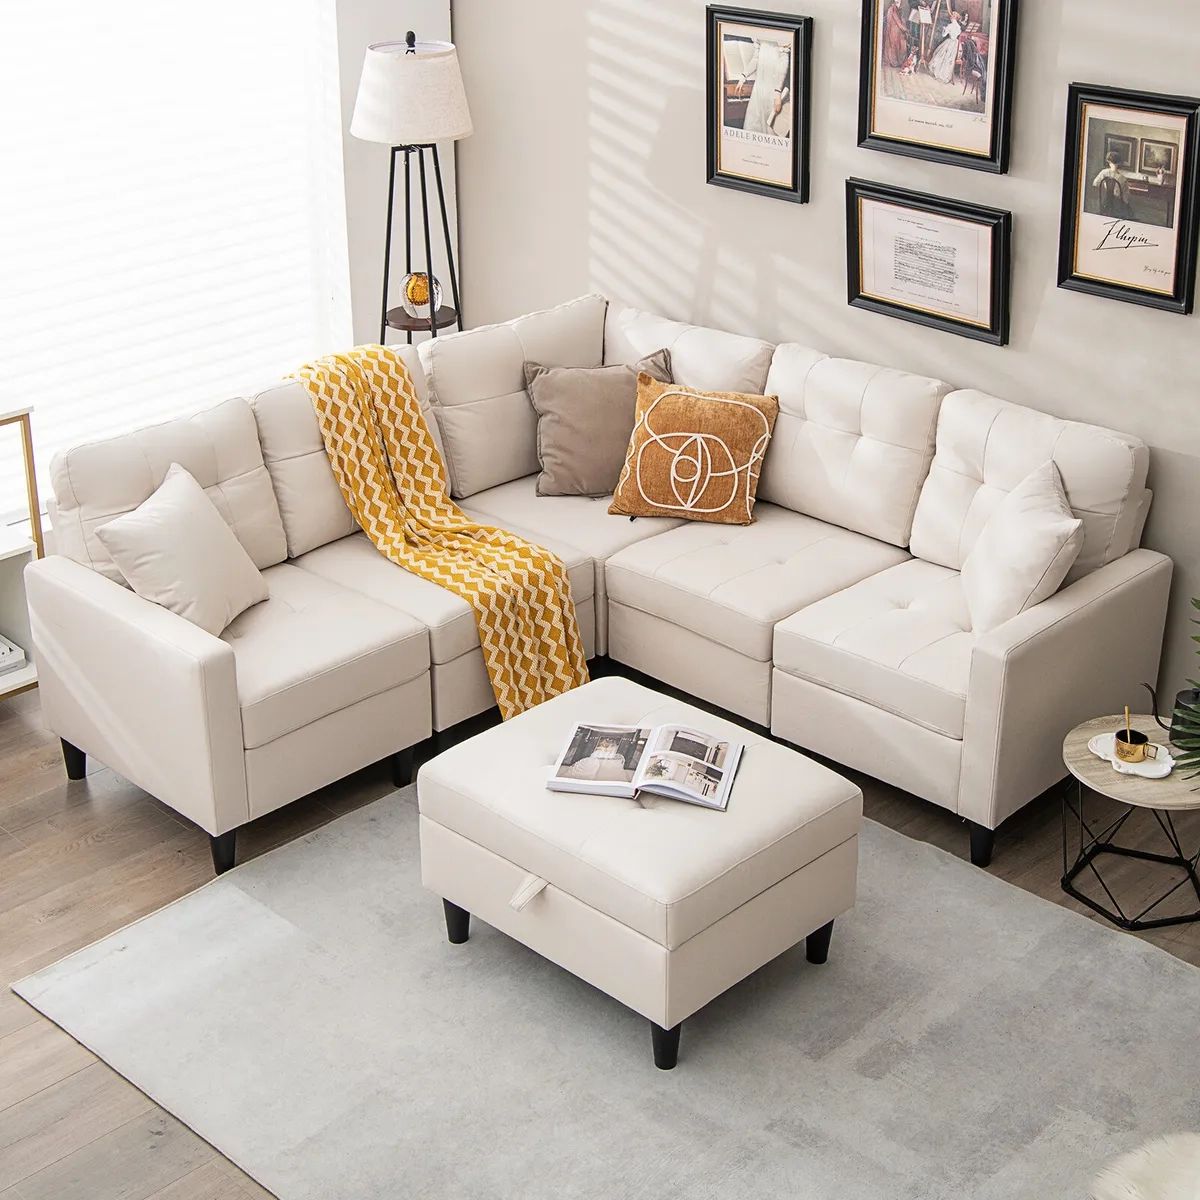 L Shaped Sectional Corner Sofa Set W/ Removable Ottoman & Seat Cushions  Beige | Ebay Regarding Beige L Shaped Sectional Sofas (Photo 3 of 15)